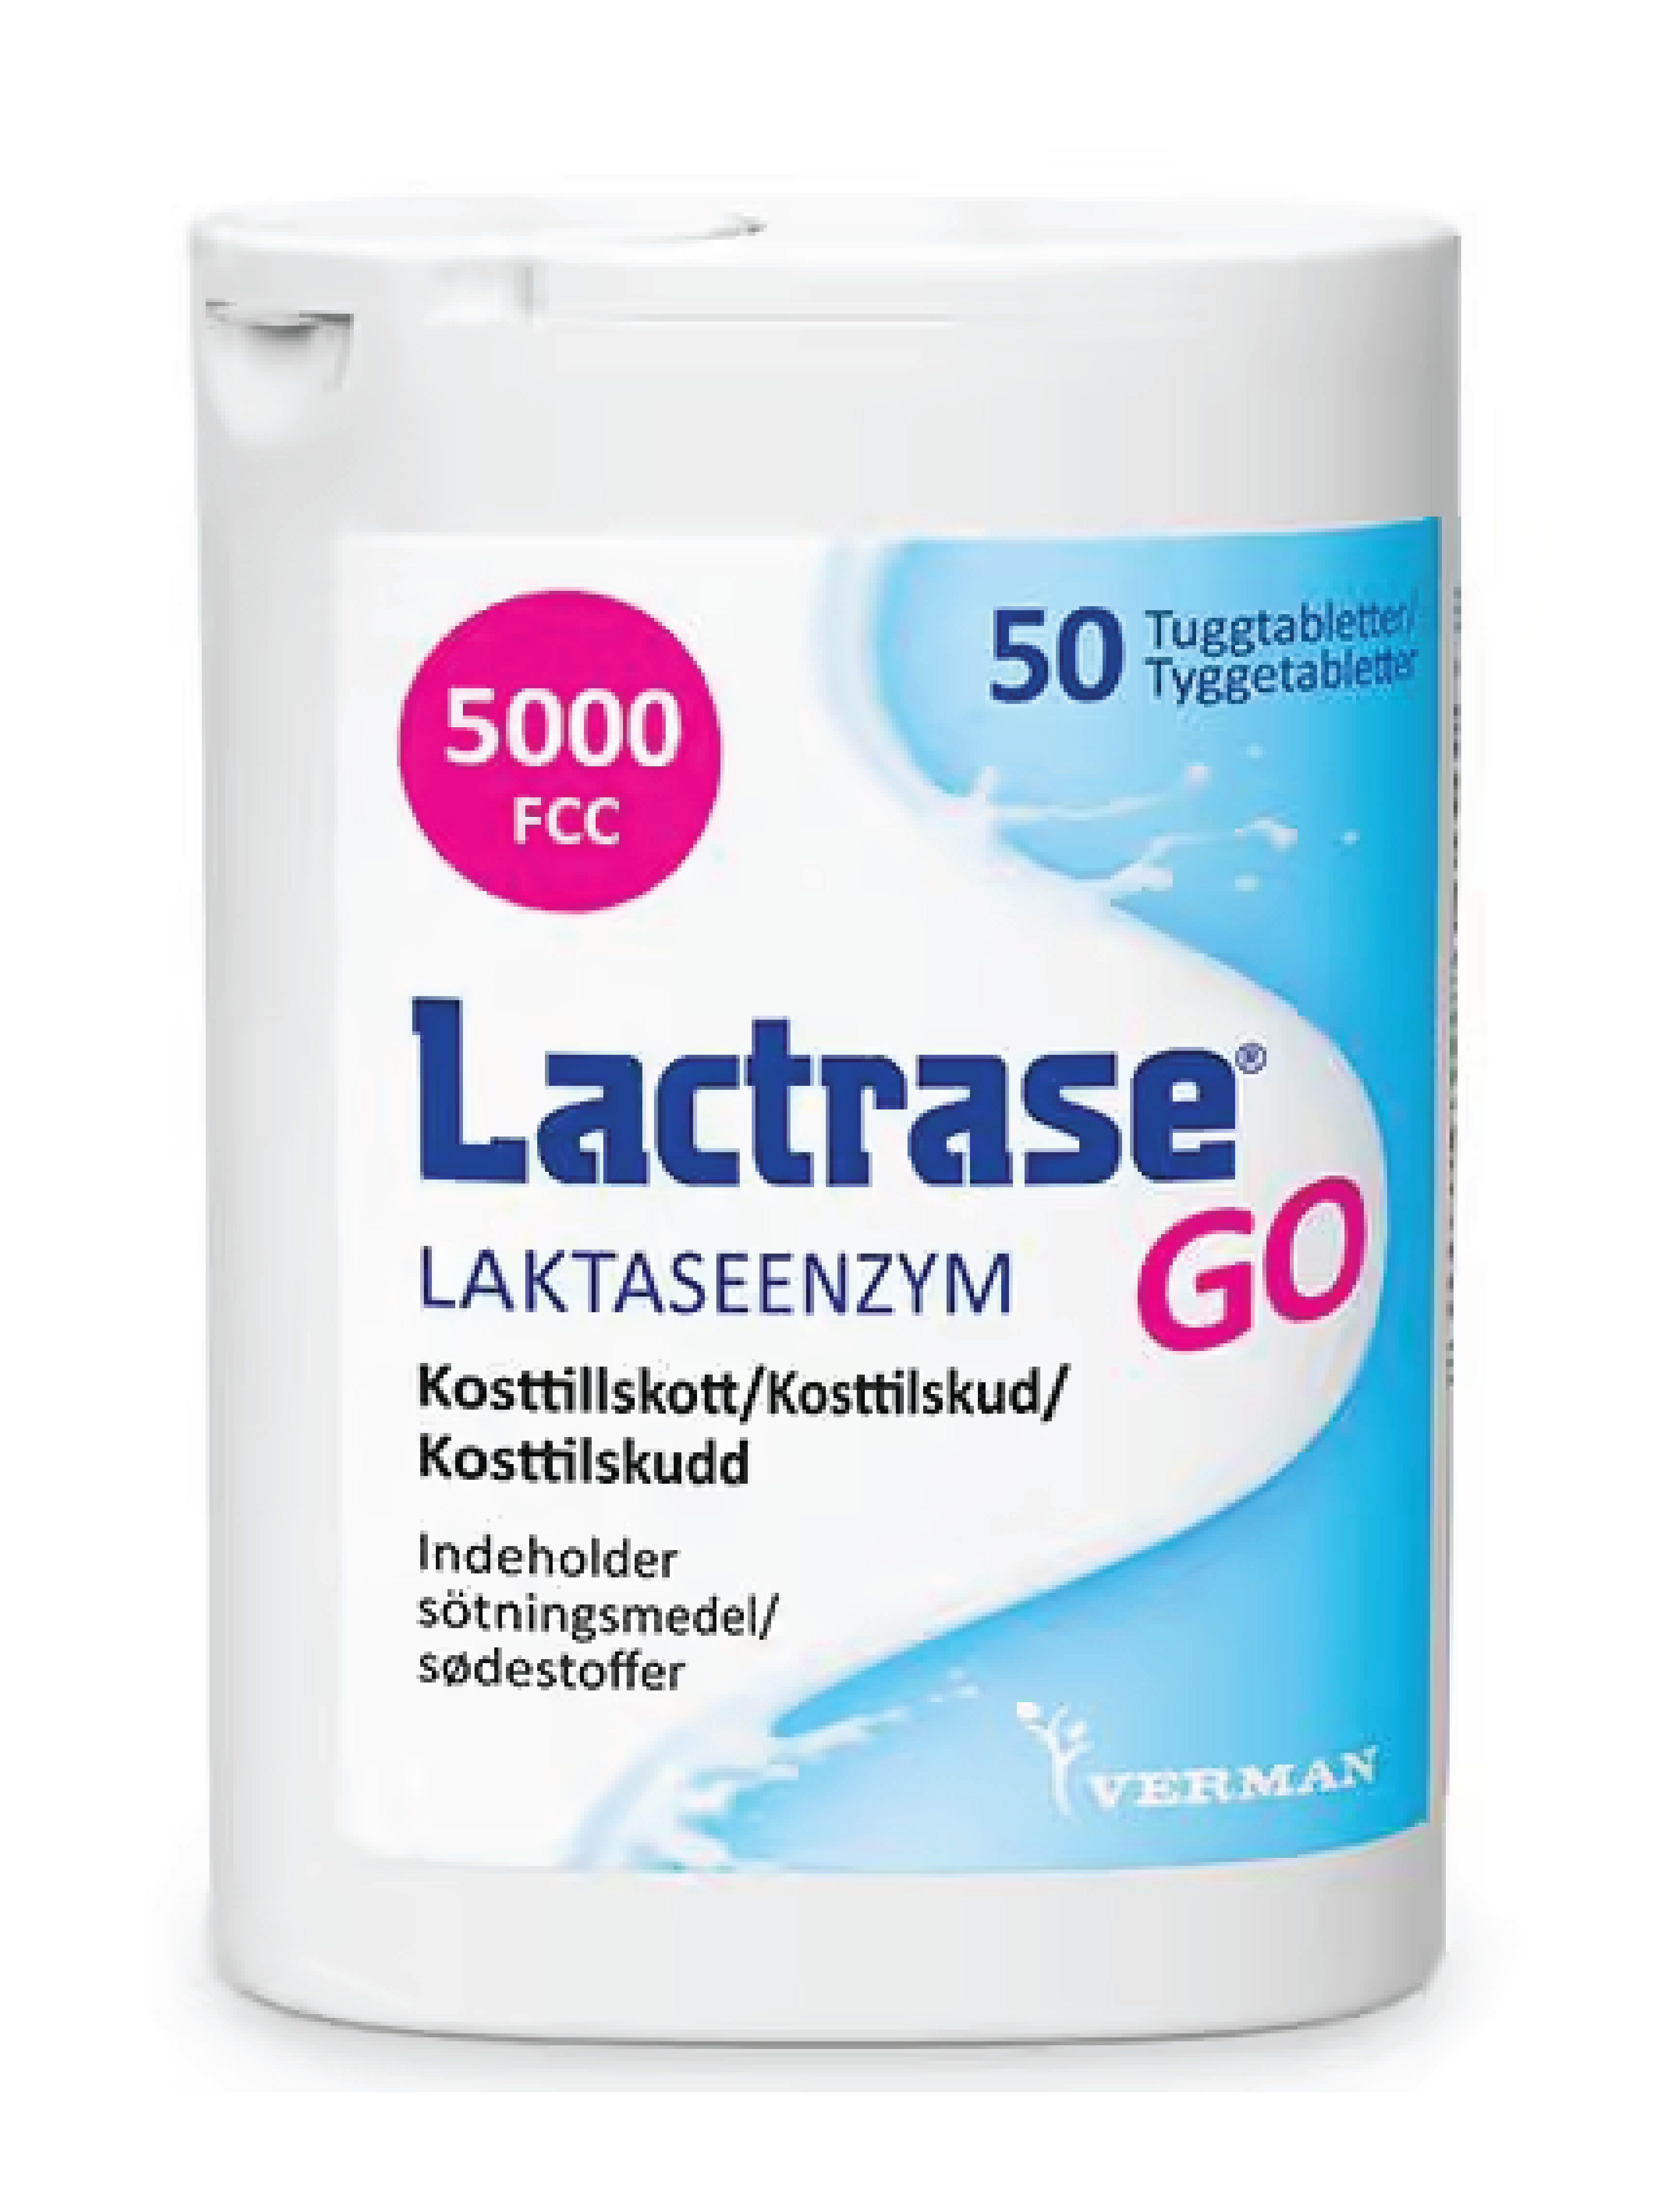 Lactrase GO Tyggetabletter, 50 stk.